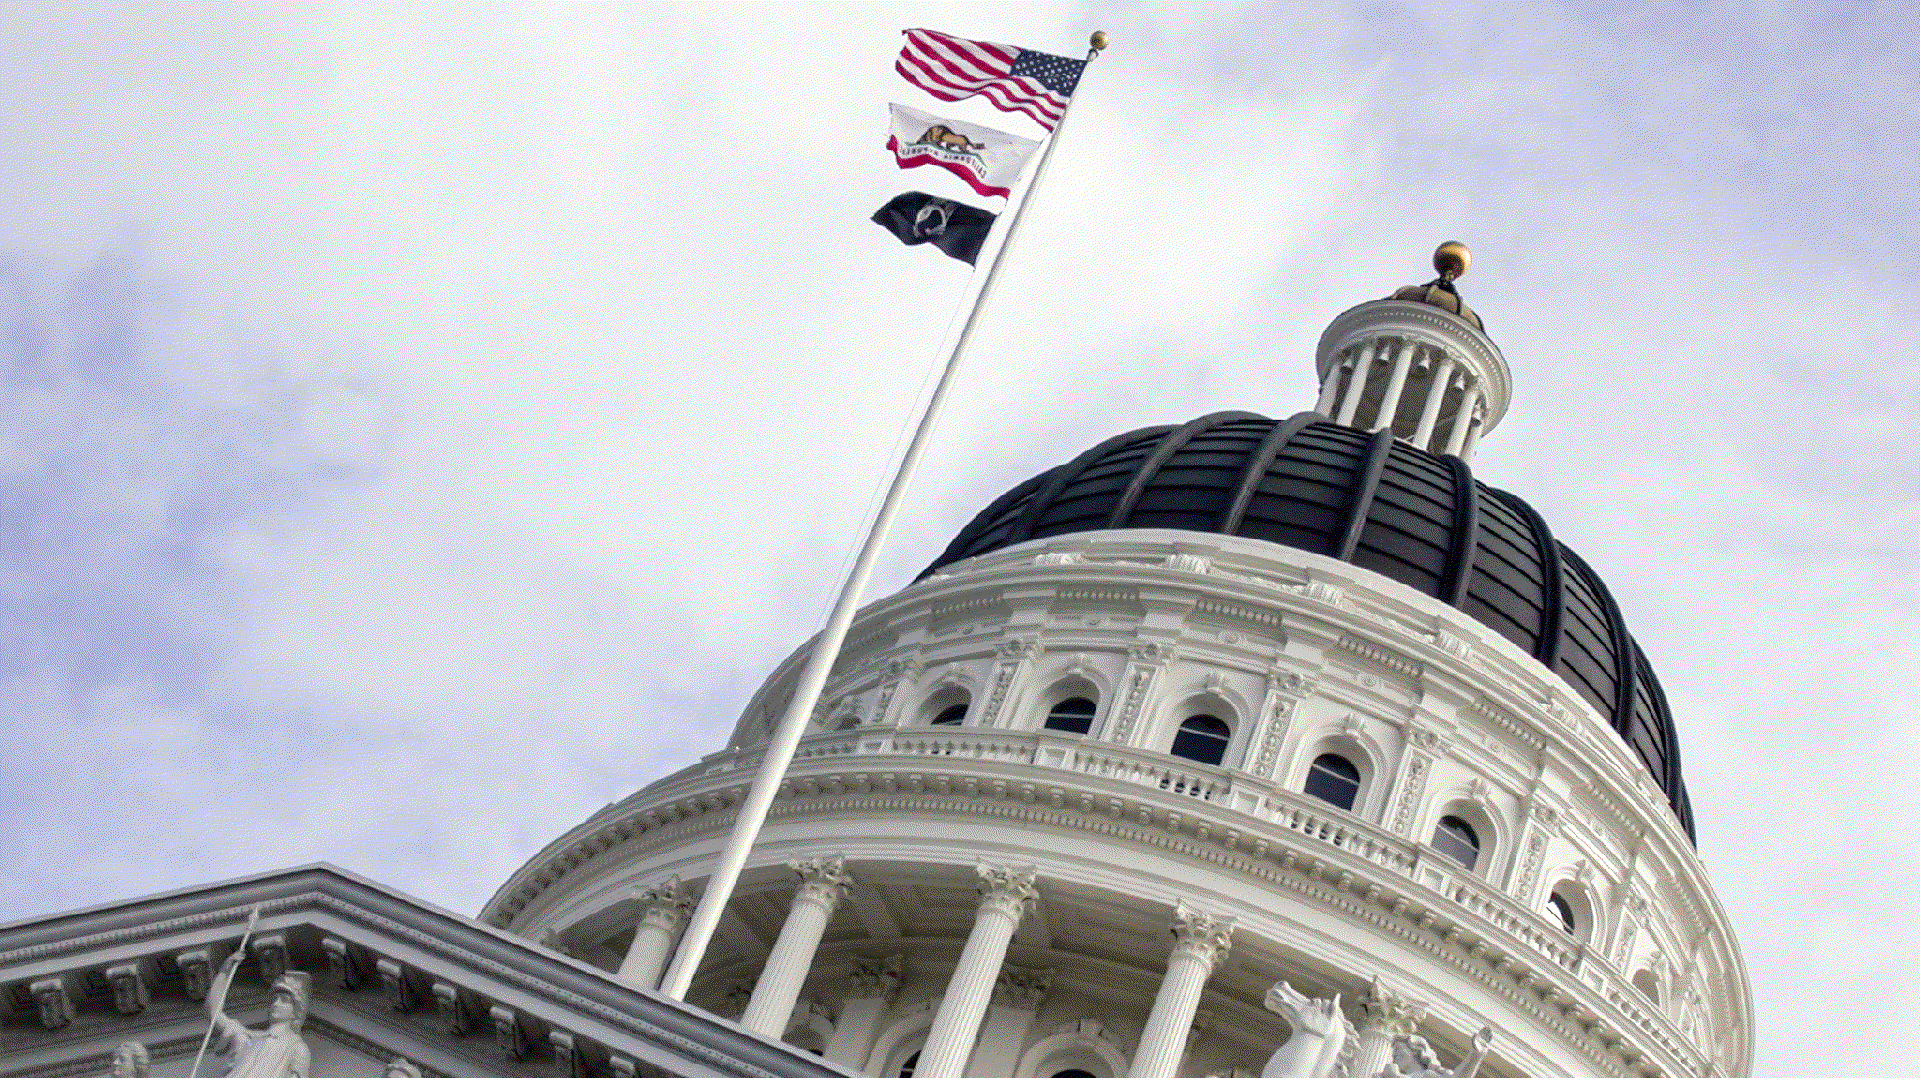 The dome of the California state capitol in Sacramento, with flags